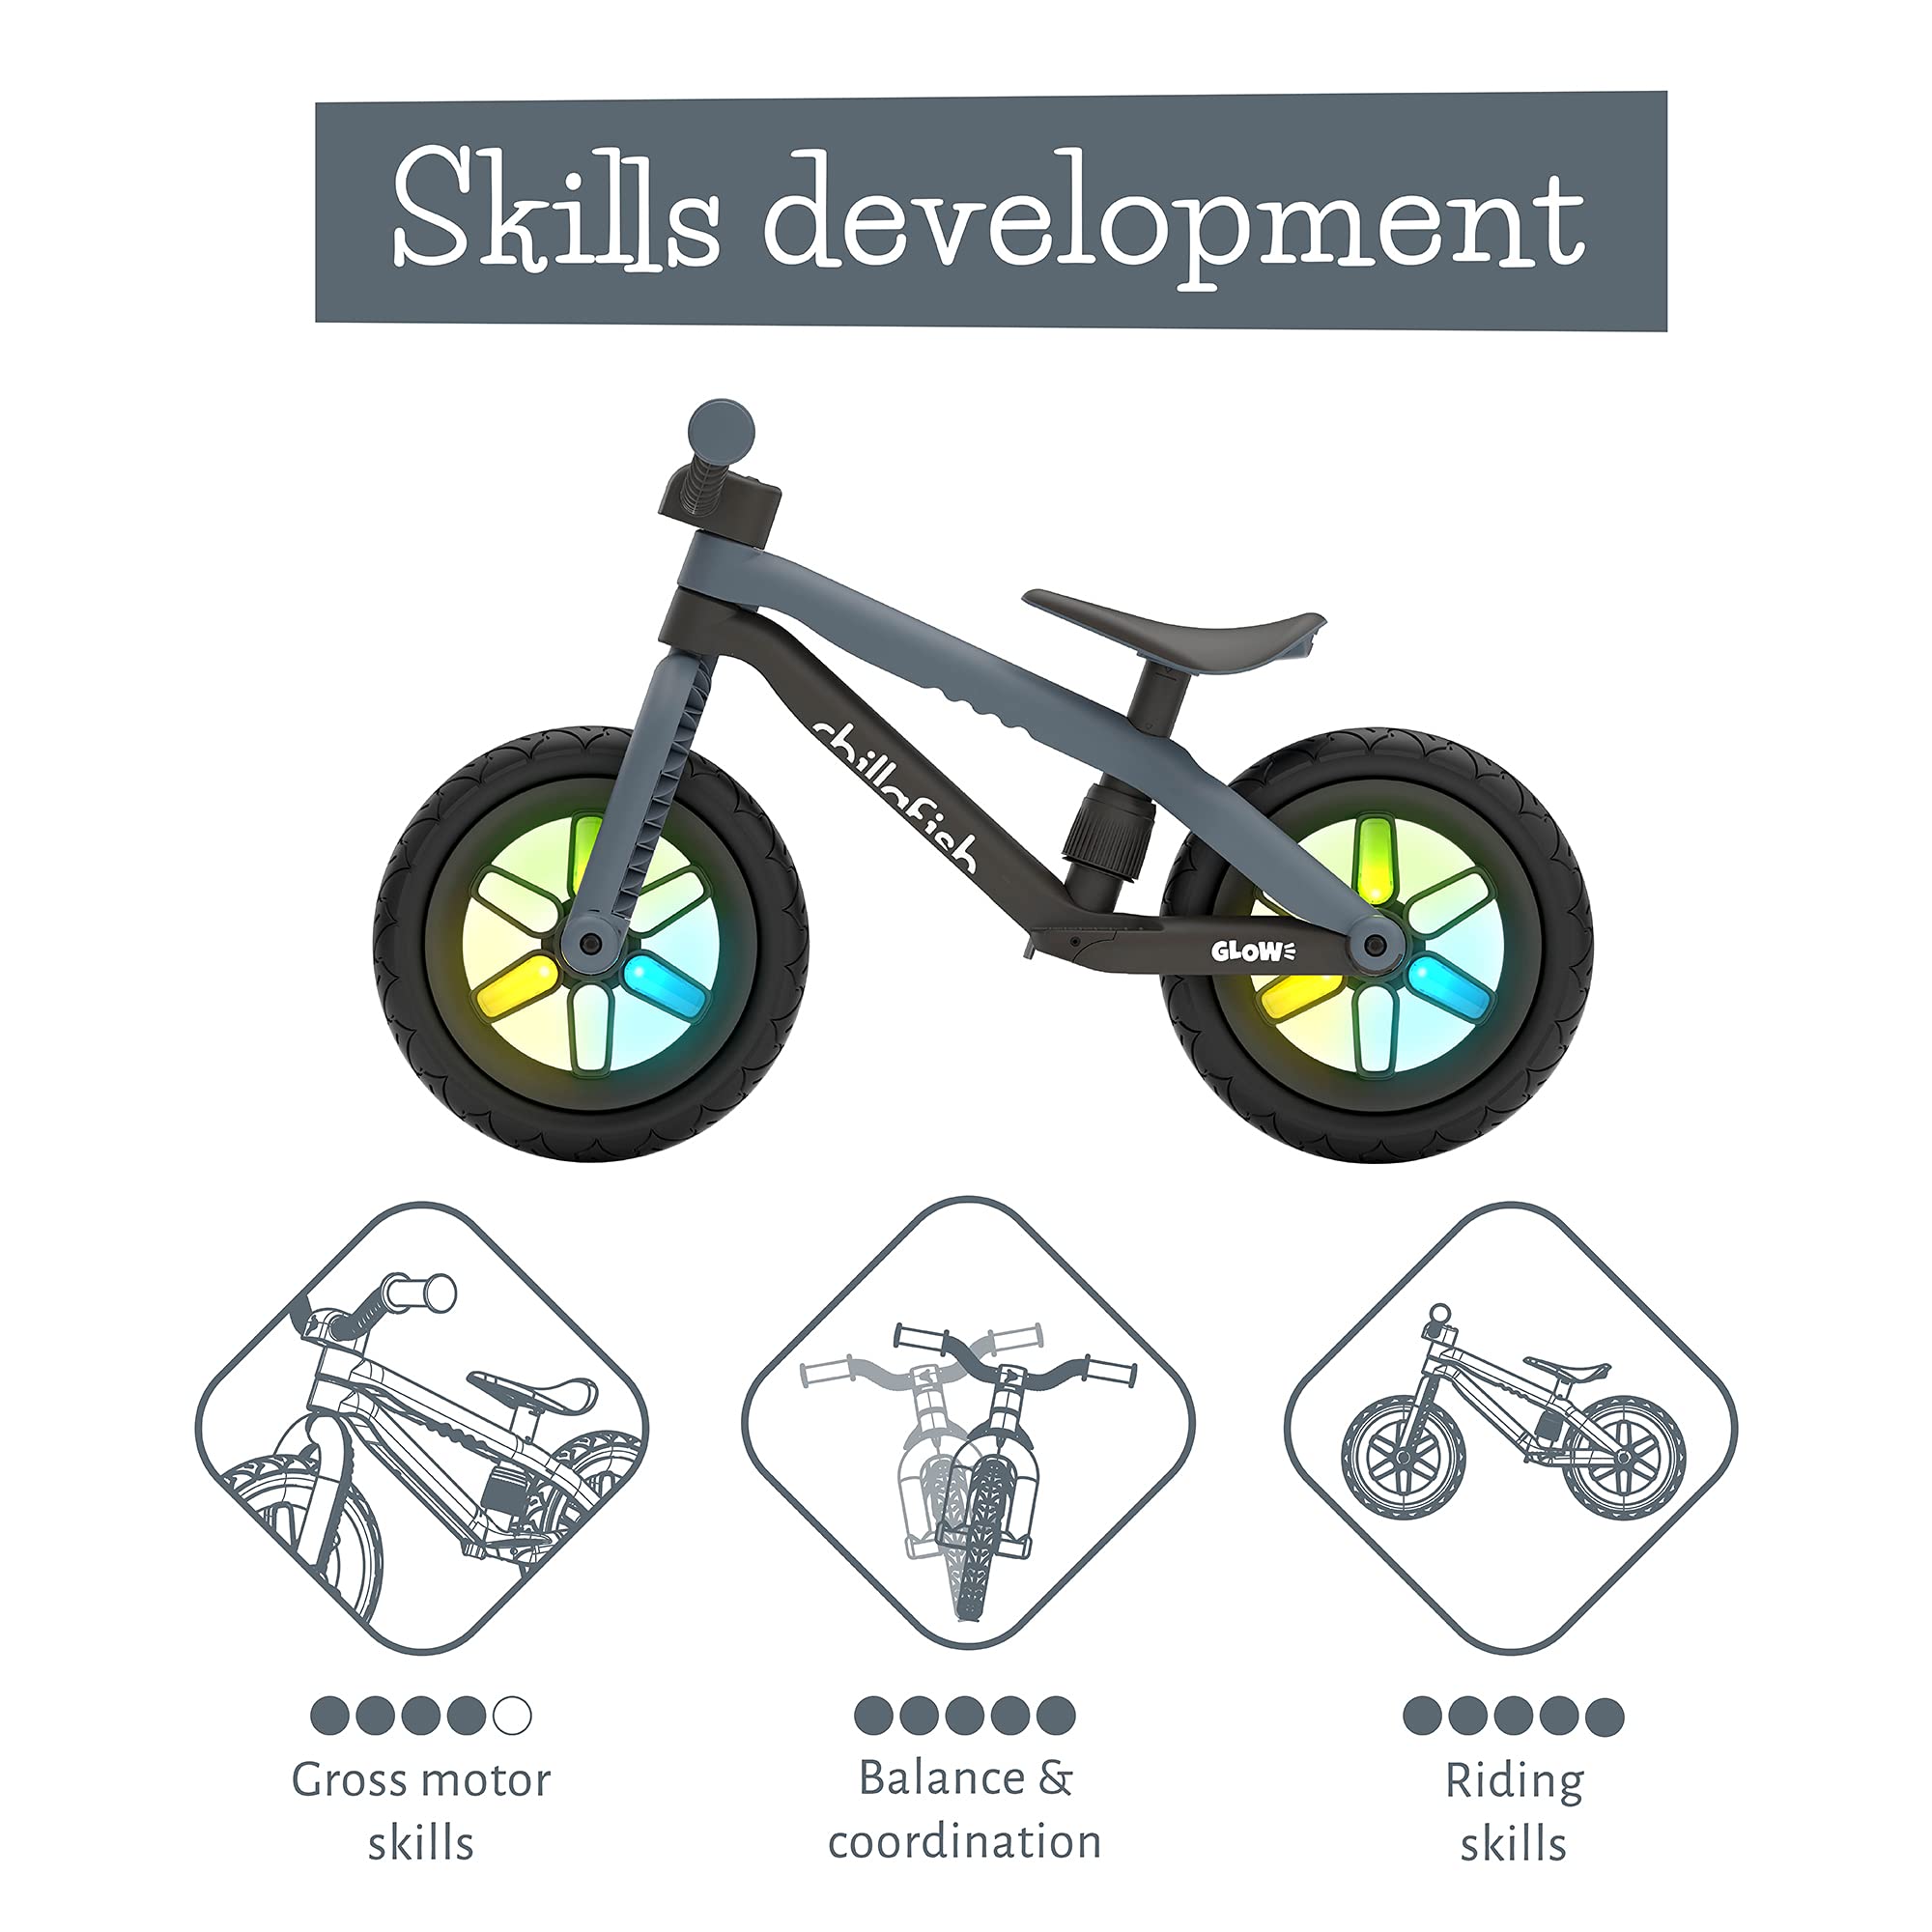 chillaFish BMXie Glow Lightweight Balance Bike with Light-up Wheels When Riding, for Kids 2 to 5 Years, 12-inch airless rubberskin Tires, Adjustable seat Without Tools, Anthracite, (CPMX04ANT)